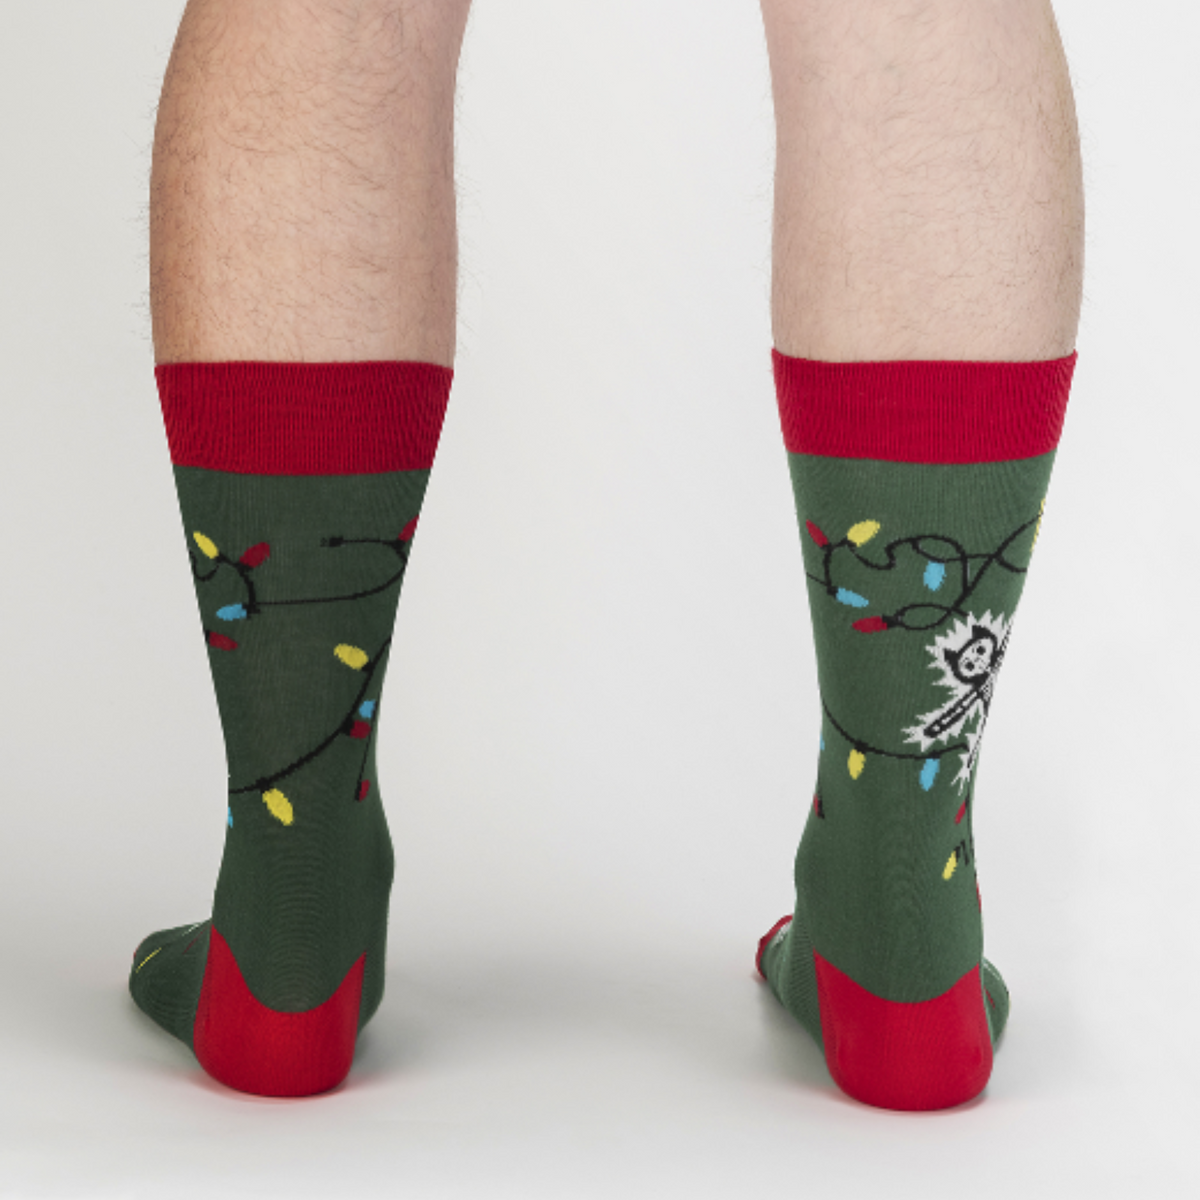 Sock It To Me Eating Light This Holiday (GLOWS IN THE DARK) women&#39;s and men&#39;s crew socks featuring green sock with red cuff, heel, and toe with cartoon cat being electrocuted by Christmas lights. Socks worn by male model seen from back. 